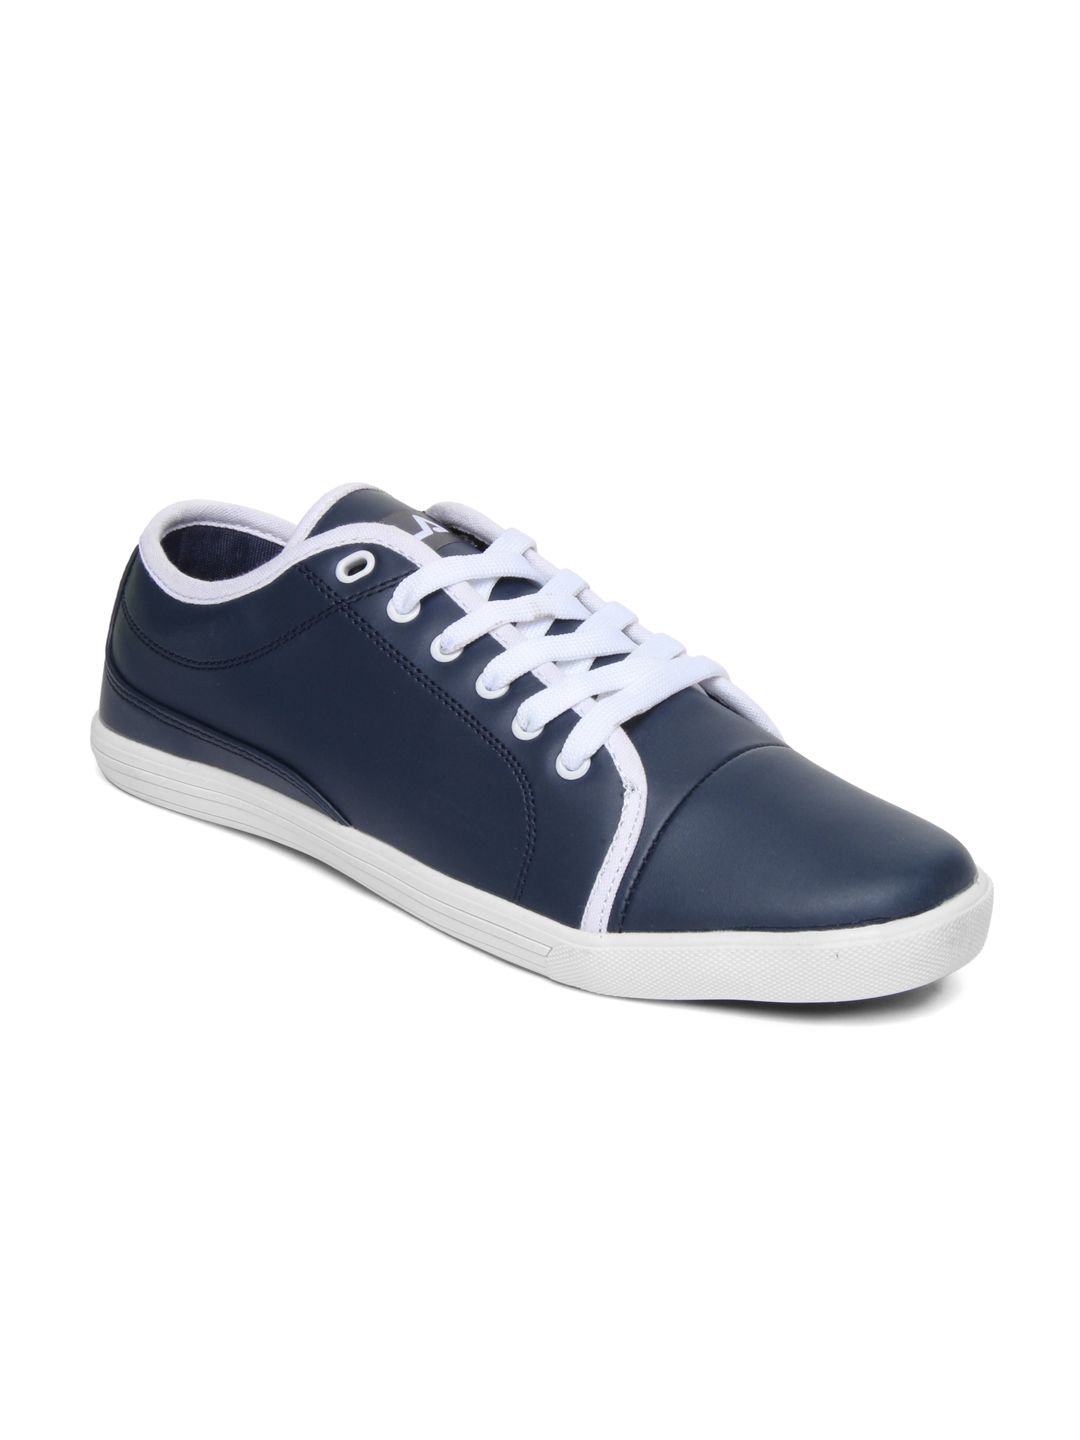 Buy Fila Men Navy Lavadro Casual Shoes - Casual Shoes for Men | Myntra